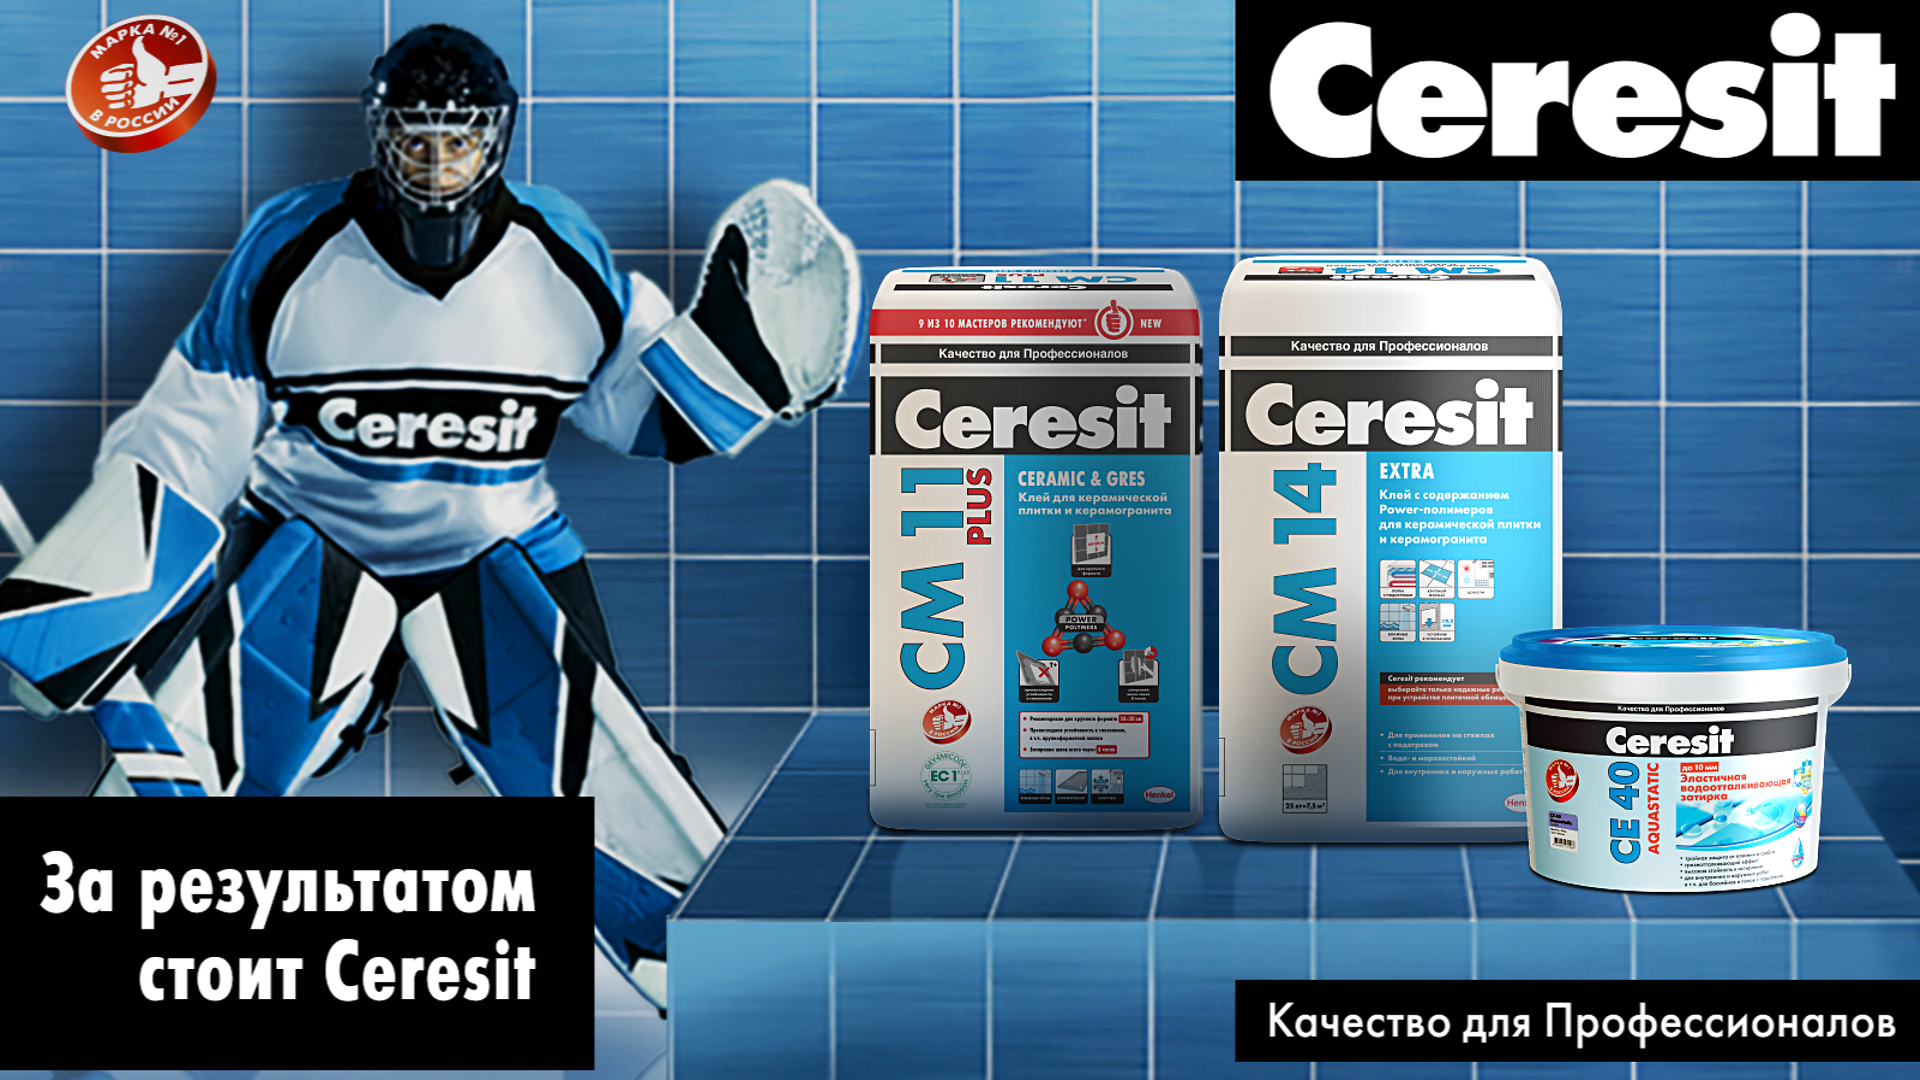 The Ceresit advertizing campaign.